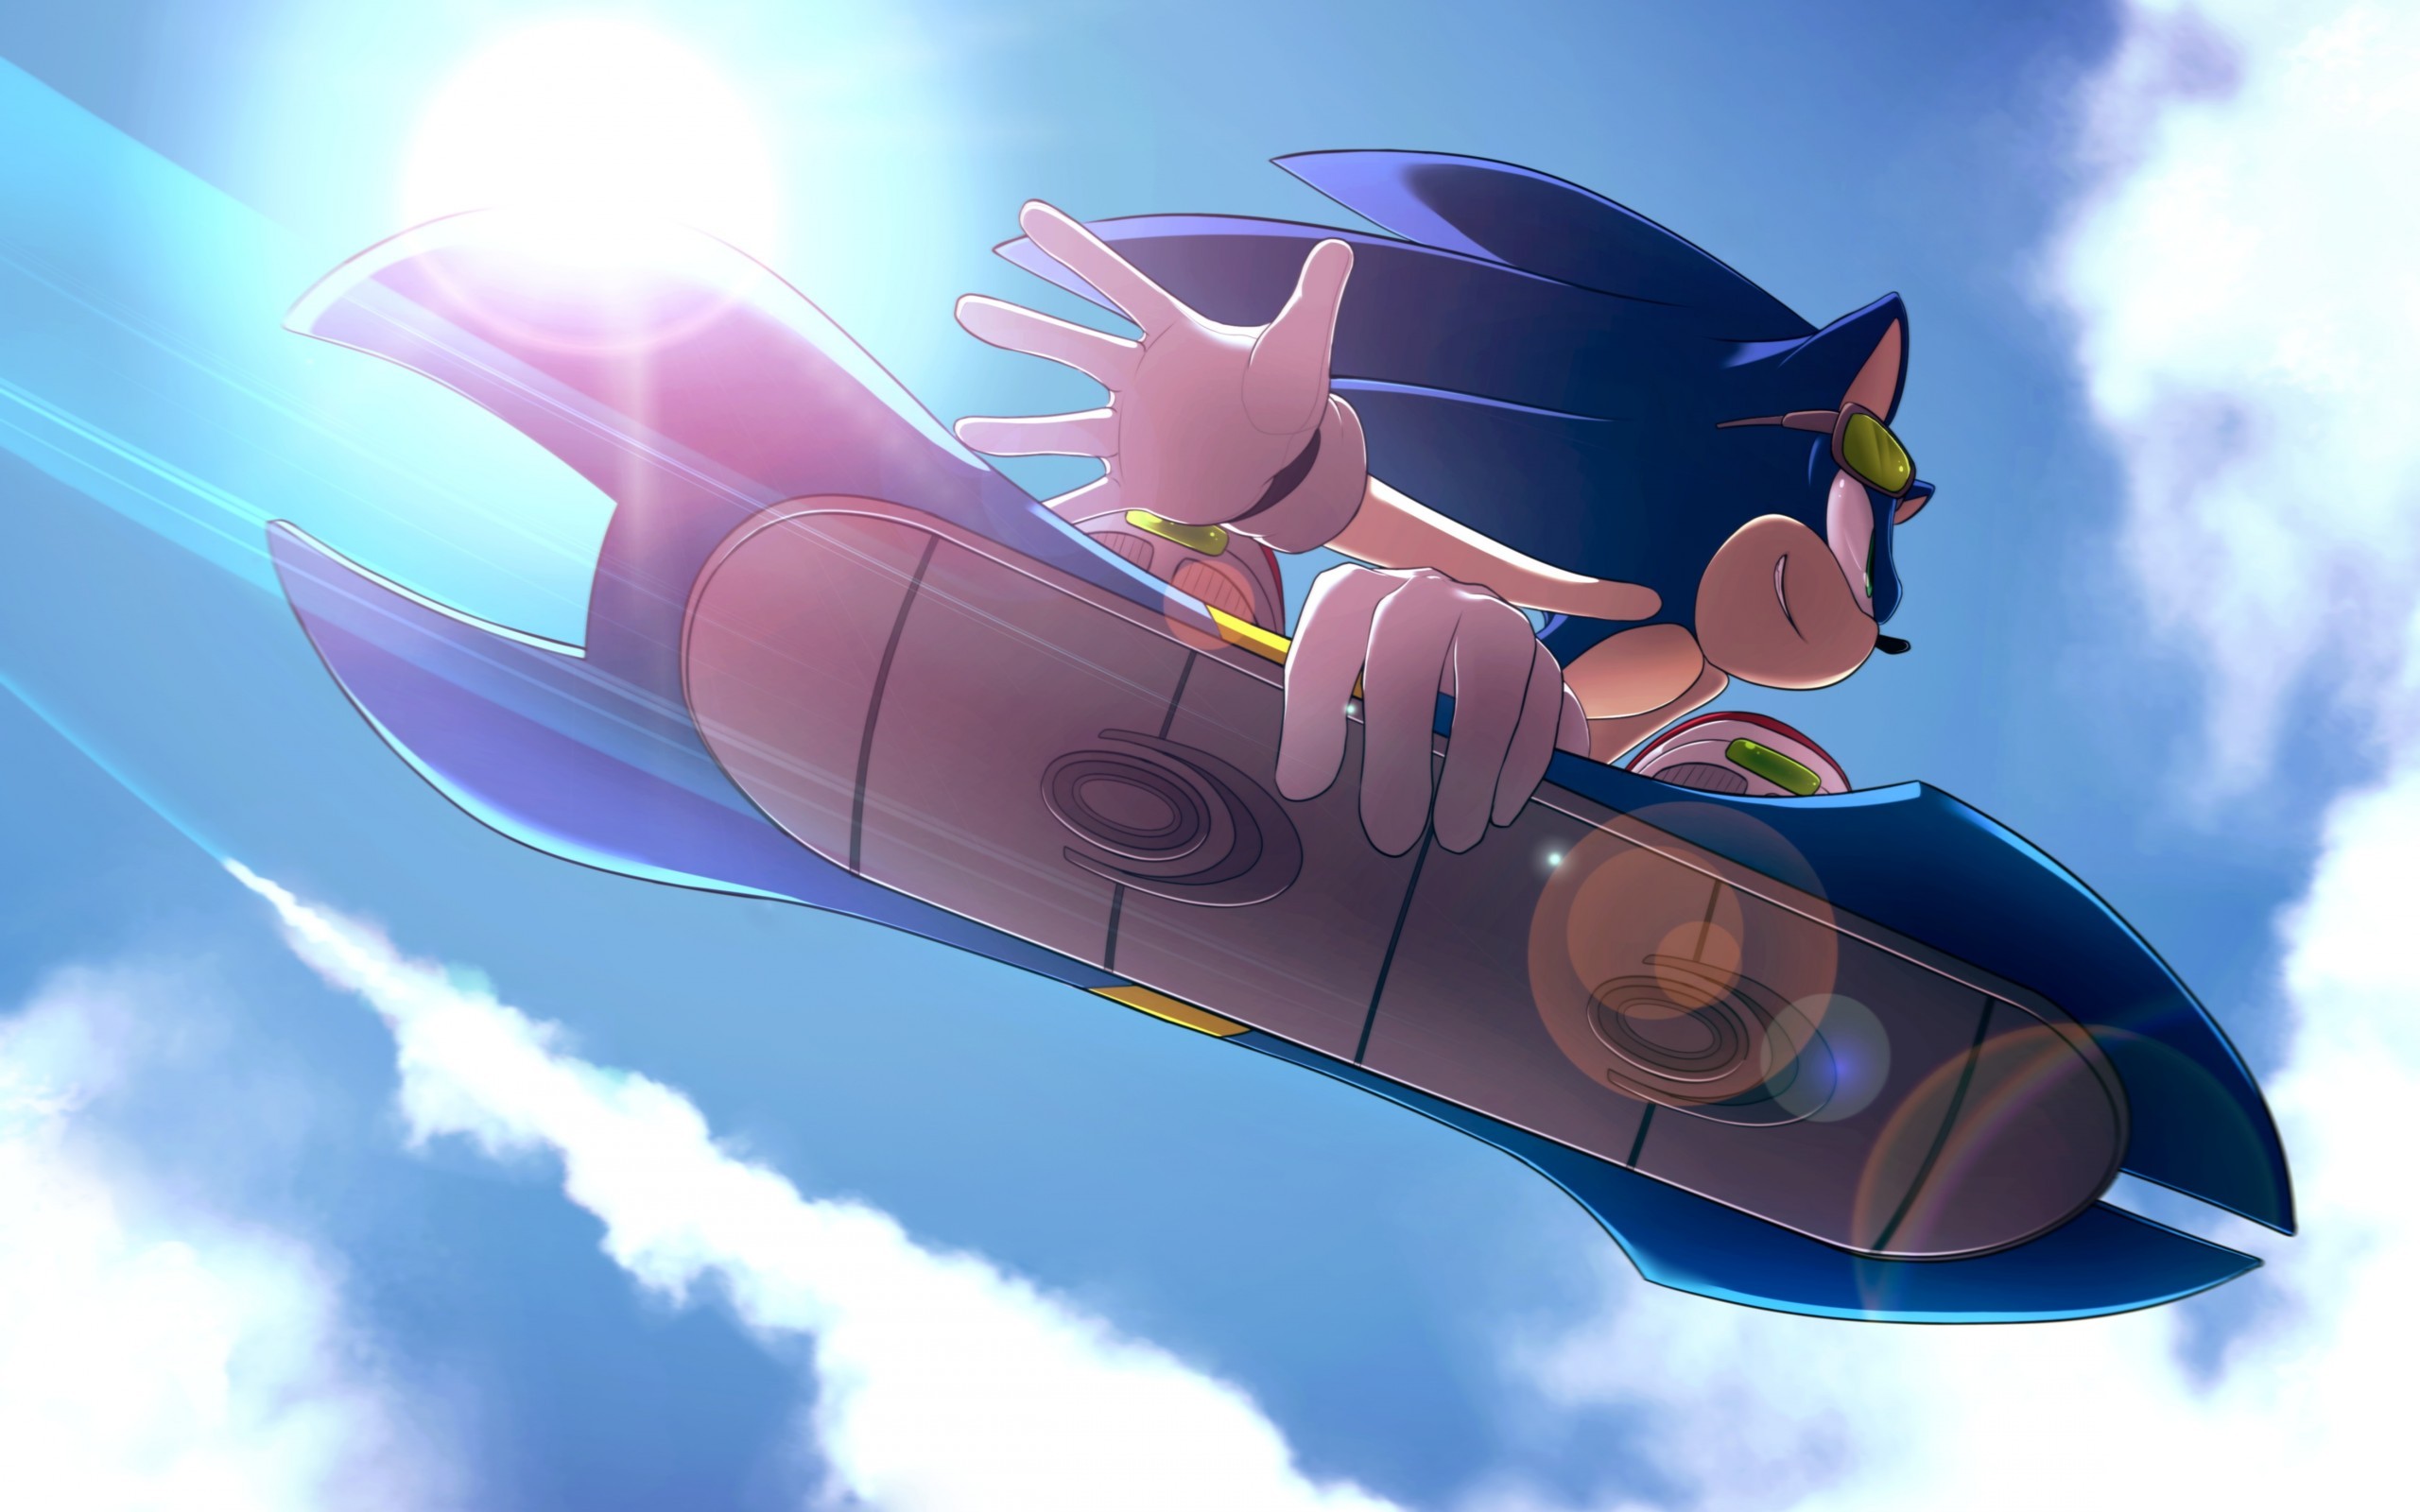 Sonic The Hedgehog Hoverboard Cyan Blue Video Game Art Sun Sunlight Clouds 2560x1600